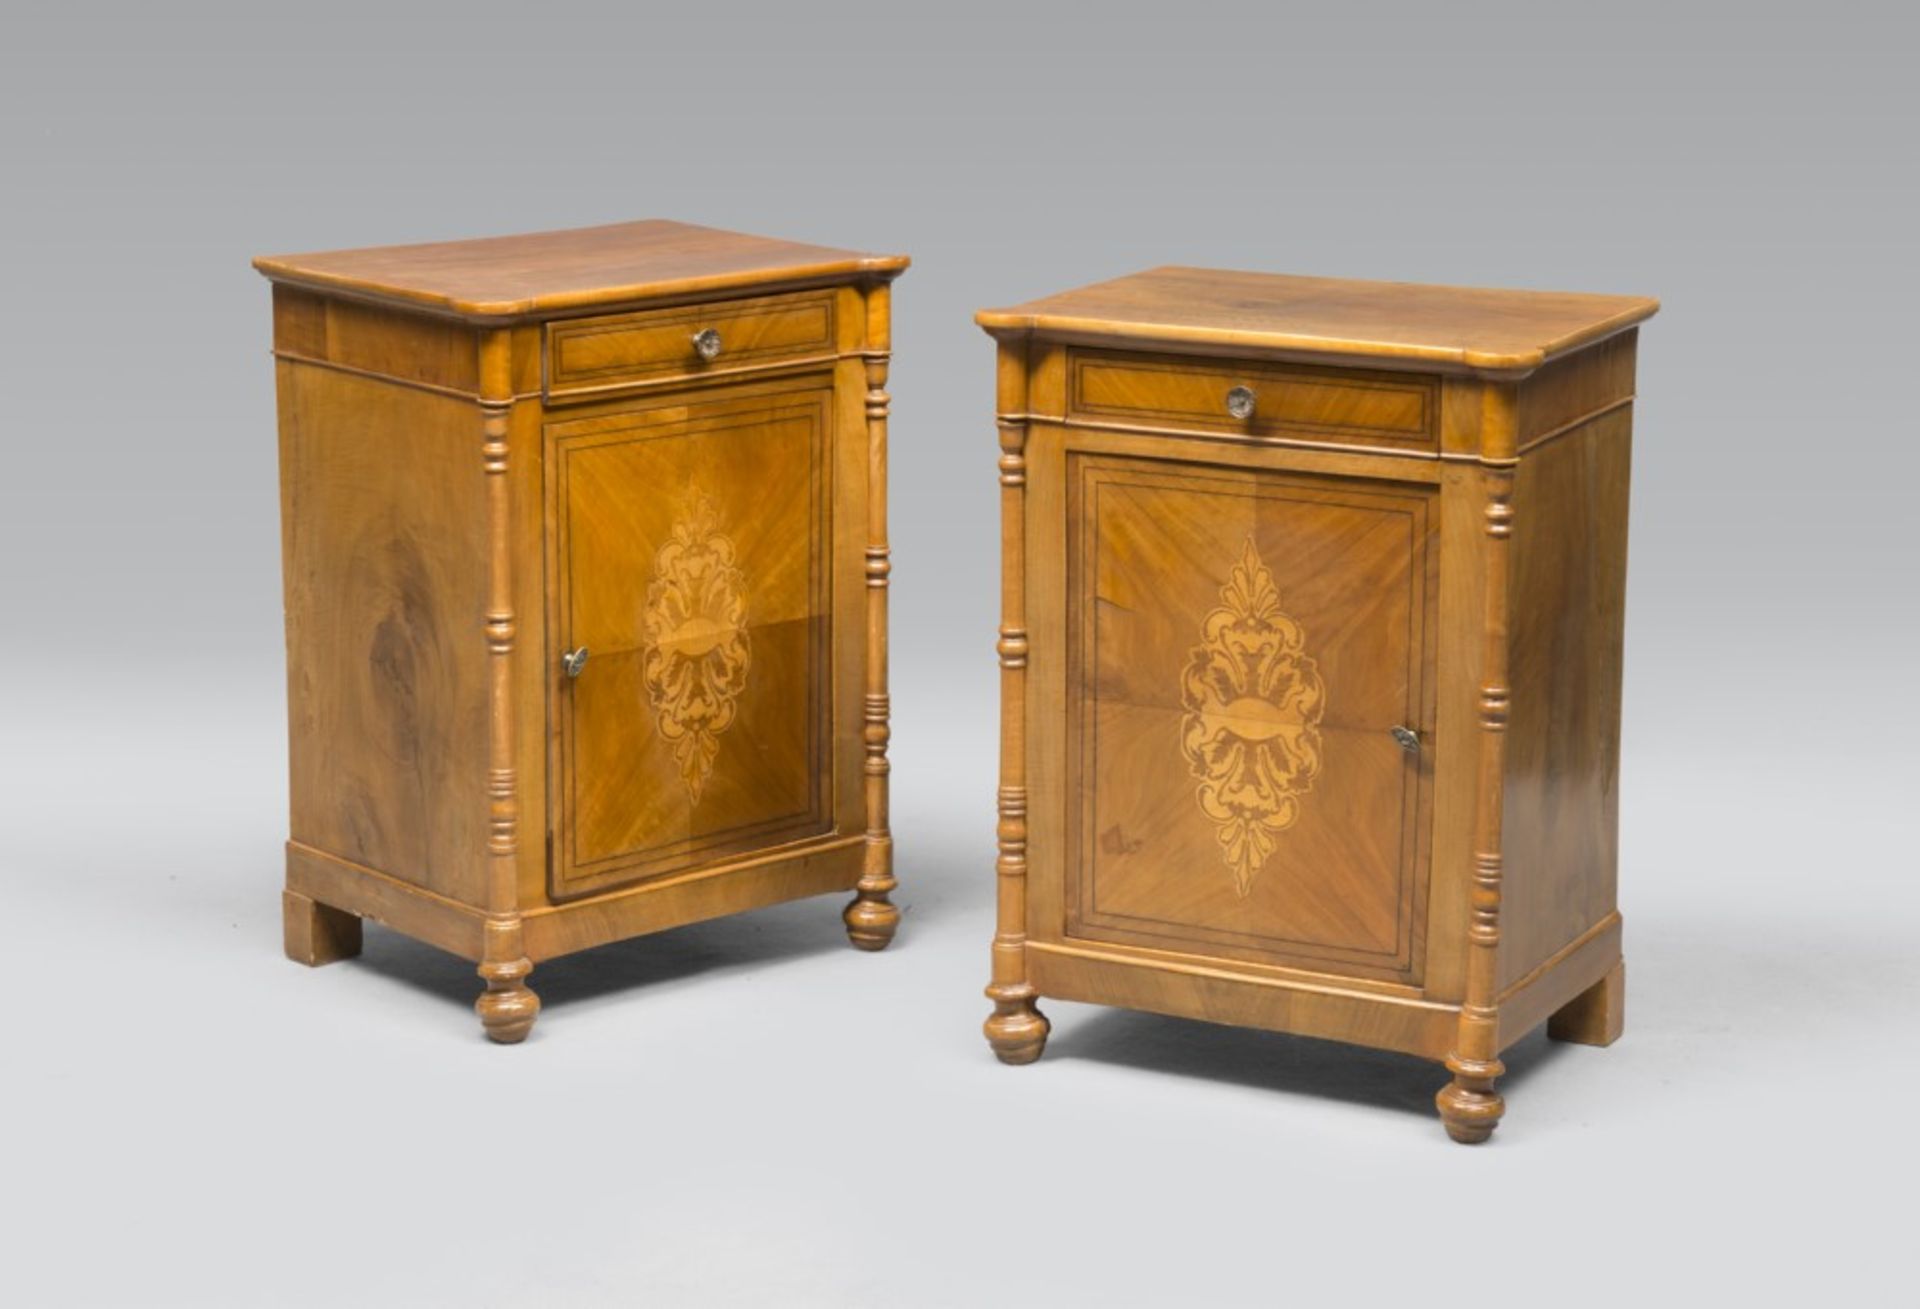 PAIR OF CHERRY BEDSIDES, MID 19TH CENTURY with inlaid ebony and Maple plant threads. Faced with